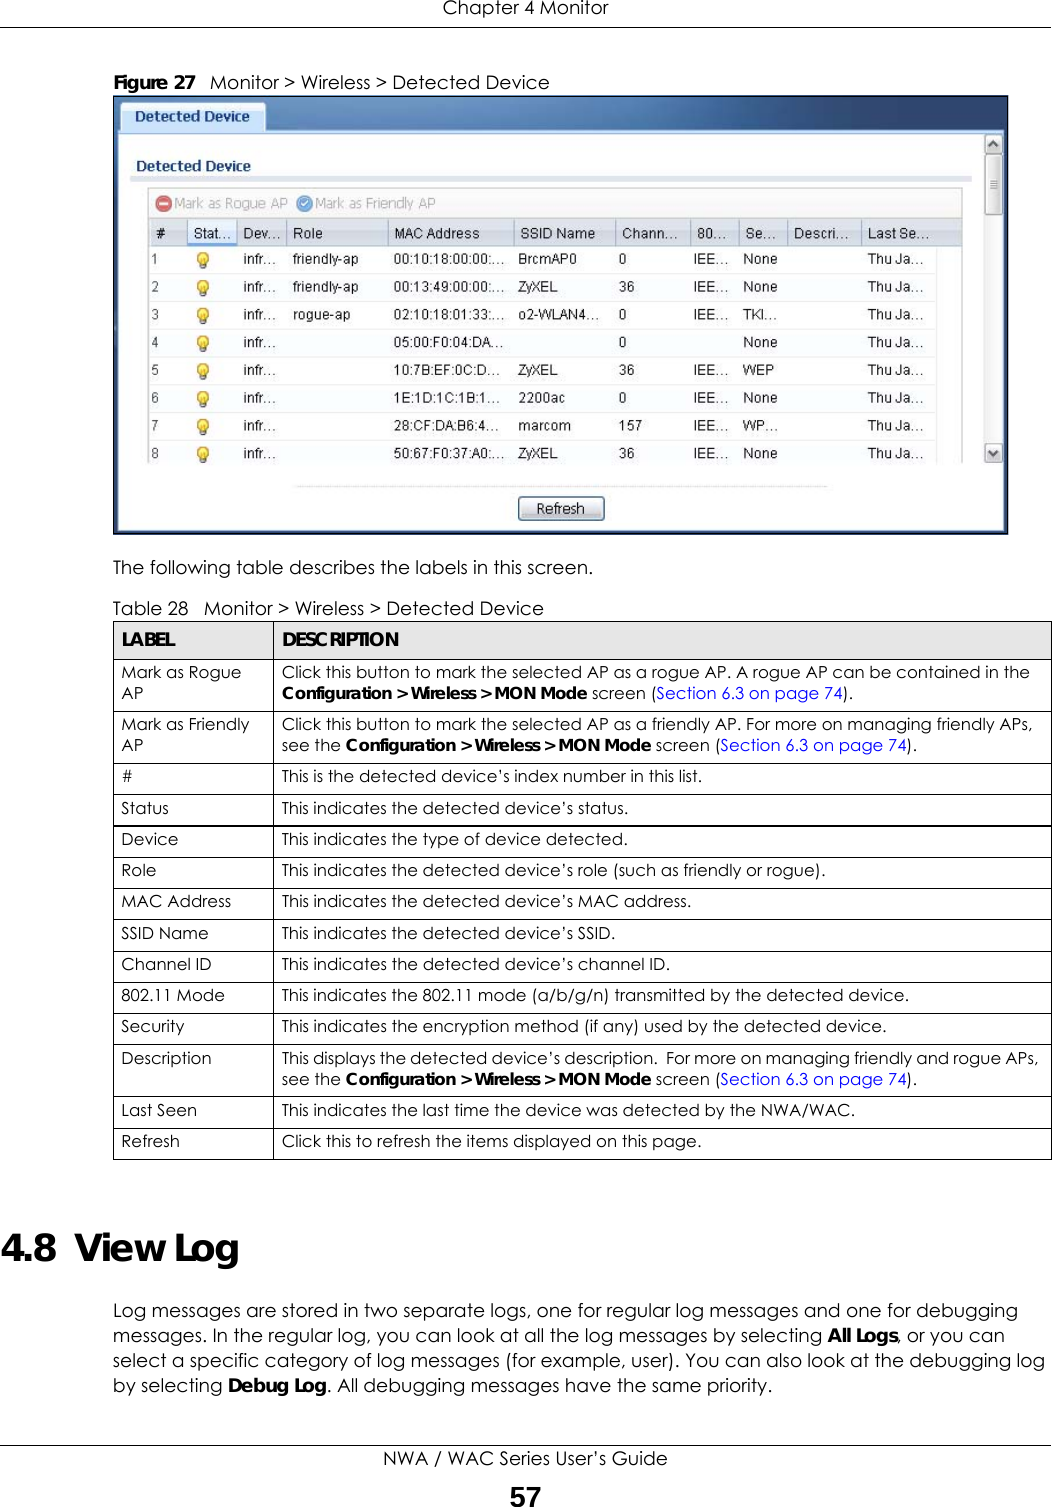 Chapter 4 MonitorNWA / WAC Series User’s Guide57Figure 27   Monitor &gt; Wireless &gt; Detected Device  The following table describes the labels in this screen. 4.8  View LogLog messages are stored in two separate logs, one for regular log messages and one for debugging messages. In the regular log, you can look at all the log messages by selecting All Logs, or you can select a specific category of log messages (for example, user). You can also look at the debugging log by selecting Debug Log. All debugging messages have the same priority. Table 28   Monitor &gt; Wireless &gt; Detected DeviceLABEL DESCRIPTIONMark as Rogue APClick this button to mark the selected AP as a rogue AP. A rogue AP can be contained in the Configuration &gt; Wireless &gt; MON Mode screen (Section 6.3 on page 74).Mark as Friendly APClick this button to mark the selected AP as a friendly AP. For more on managing friendly APs, see the Configuration &gt; Wireless &gt; MON Mode screen (Section 6.3 on page 74).# This is the detected device’s index number in this list.Status This indicates the detected device’s status.Device This indicates the type of device detected.Role This indicates the detected device’s role (such as friendly or rogue).MAC Address This indicates the detected device’s MAC address.SSID Name This indicates the detected device’s SSID.Channel ID This indicates the detected device’s channel ID.802.11 Mode This indicates the 802.11 mode (a/b/g/n) transmitted by the detected device.Security This indicates the encryption method (if any) used by the detected device.Description This displays the detected device’s description.  For more on managing friendly and rogue APs, see the Configuration &gt; Wireless &gt; MON Mode screen (Section 6.3 on page 74).Last Seen This indicates the last time the device was detected by the NWA/WAC.Refresh Click this to refresh the items displayed on this page.